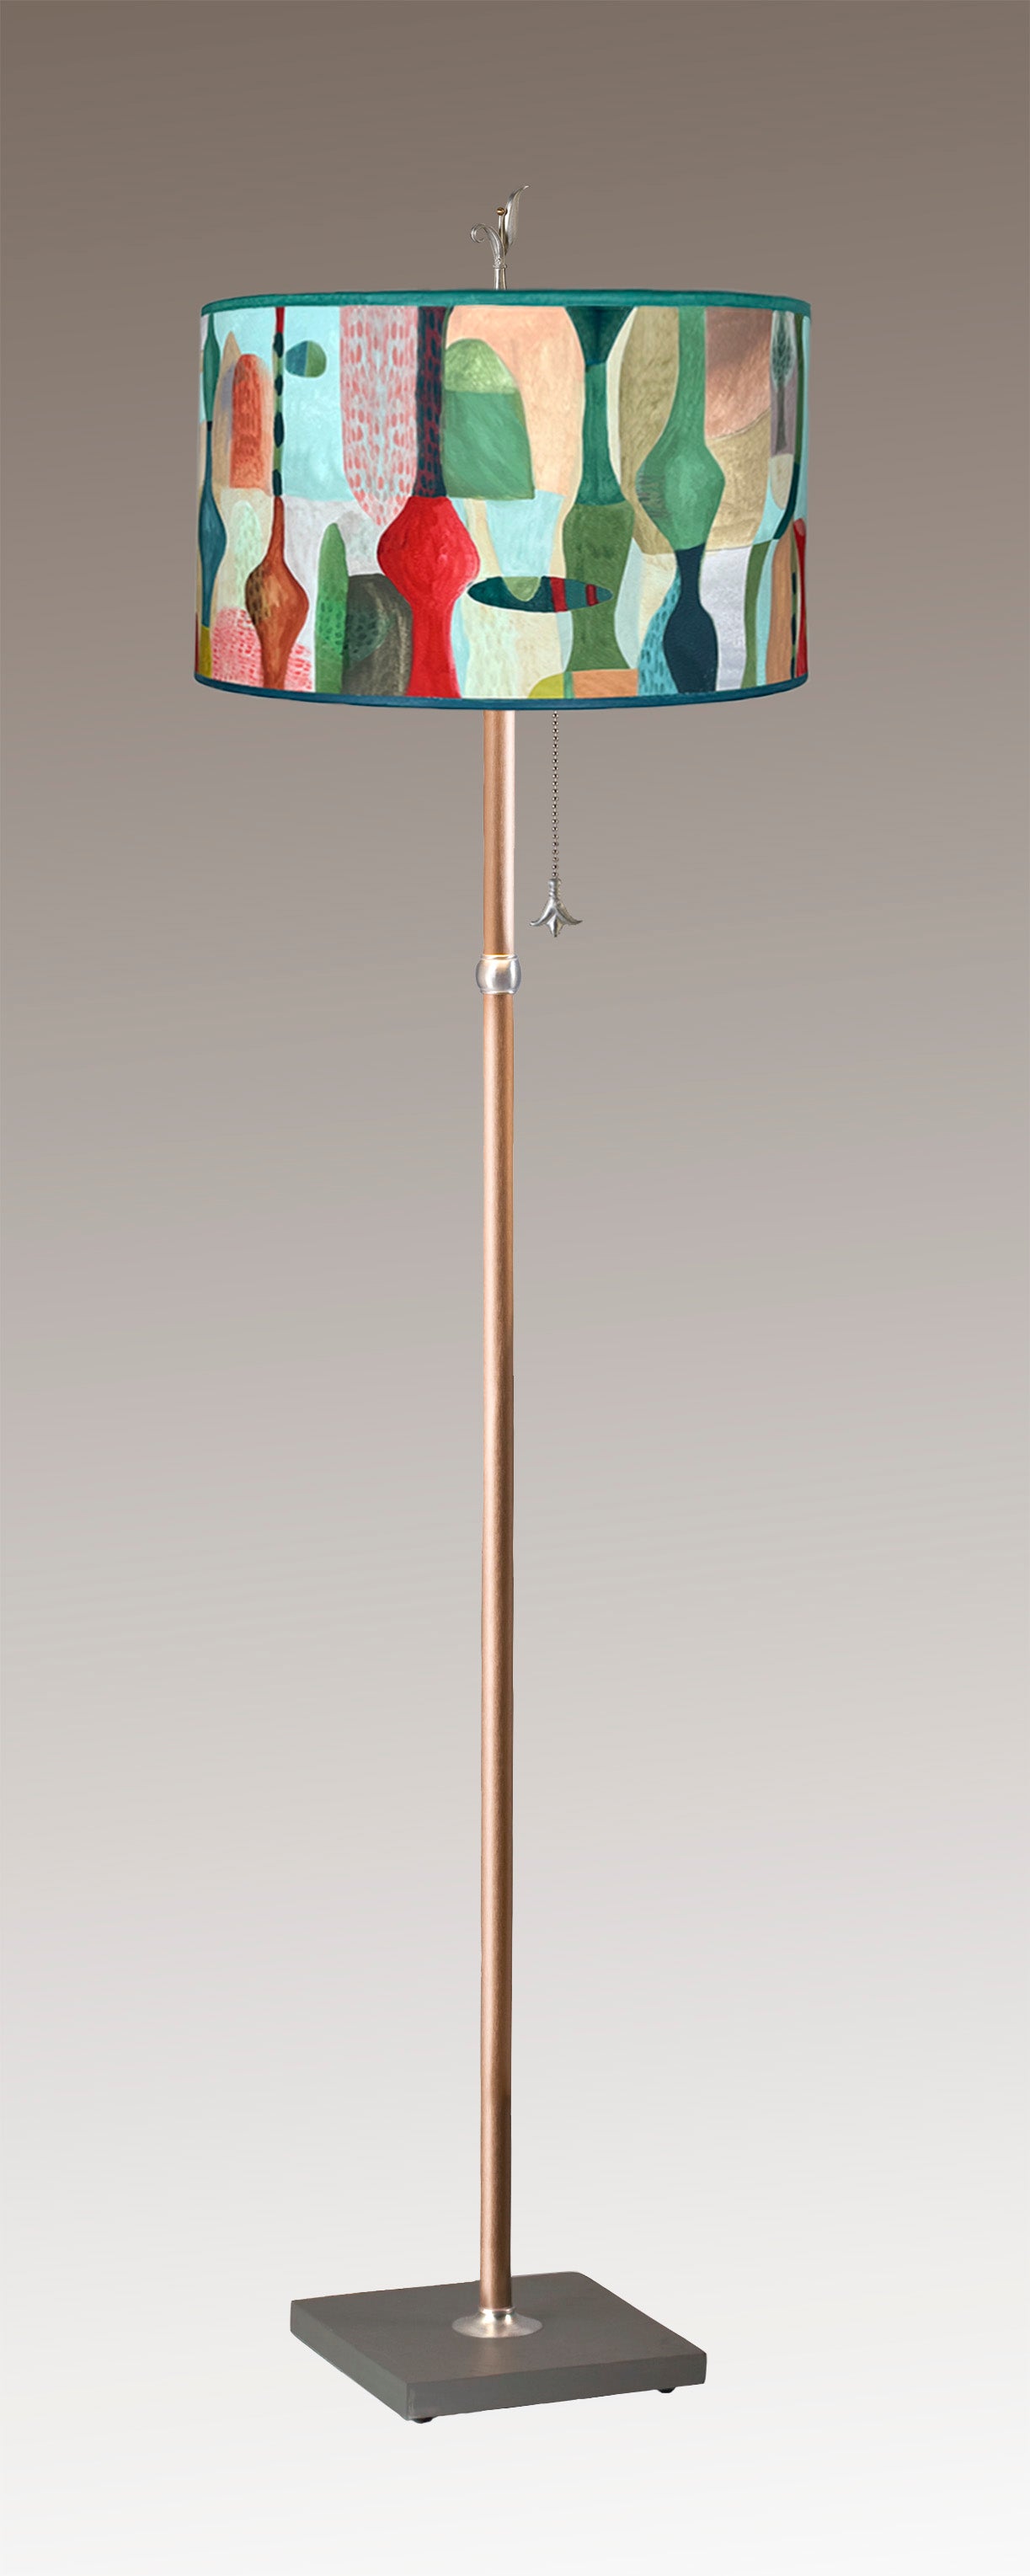 Janna Ugone & Co Floor Lamp Copper Floor Lamp with Large Drum Shade in Riviera in Poppy